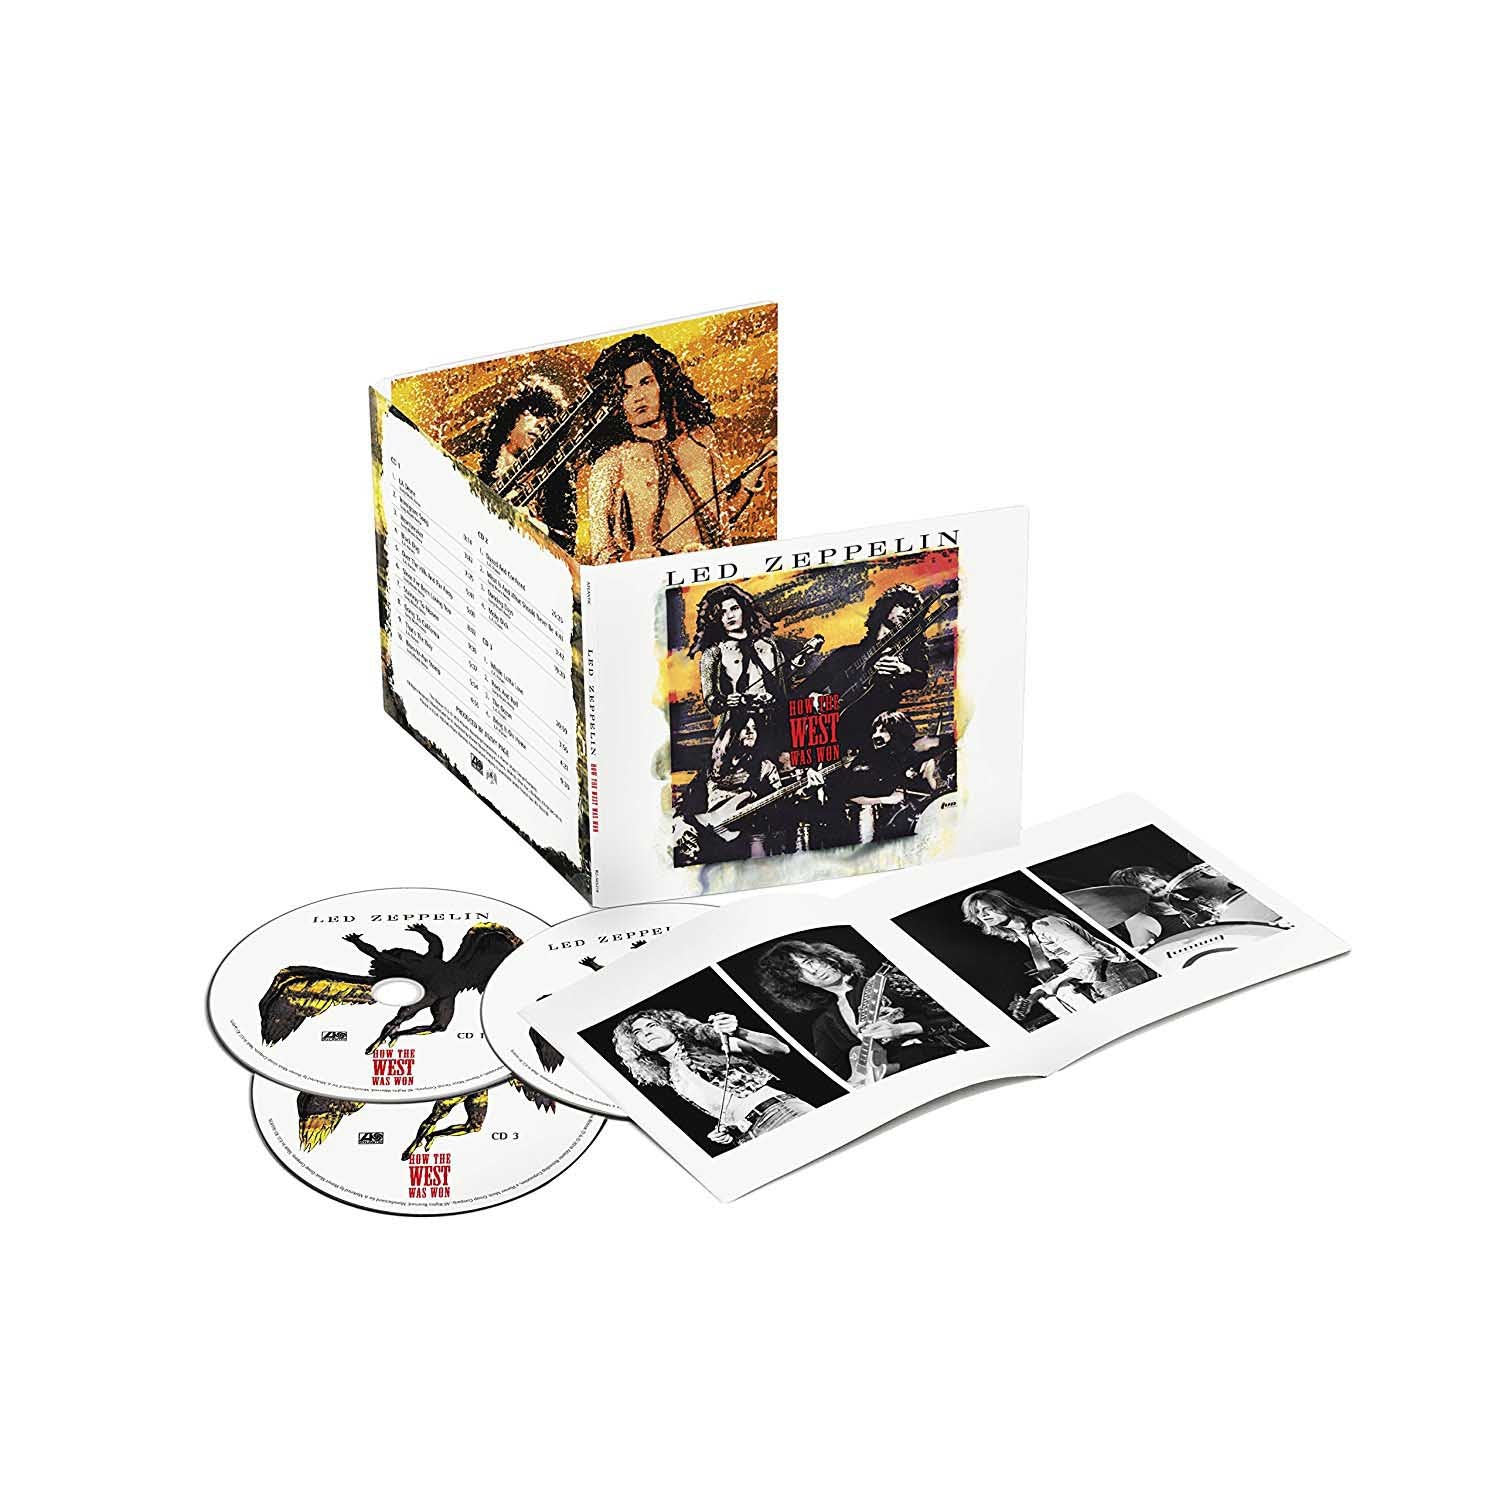 Led Zeppelin "How The West Was Won" 3CD (2018 Remaster)